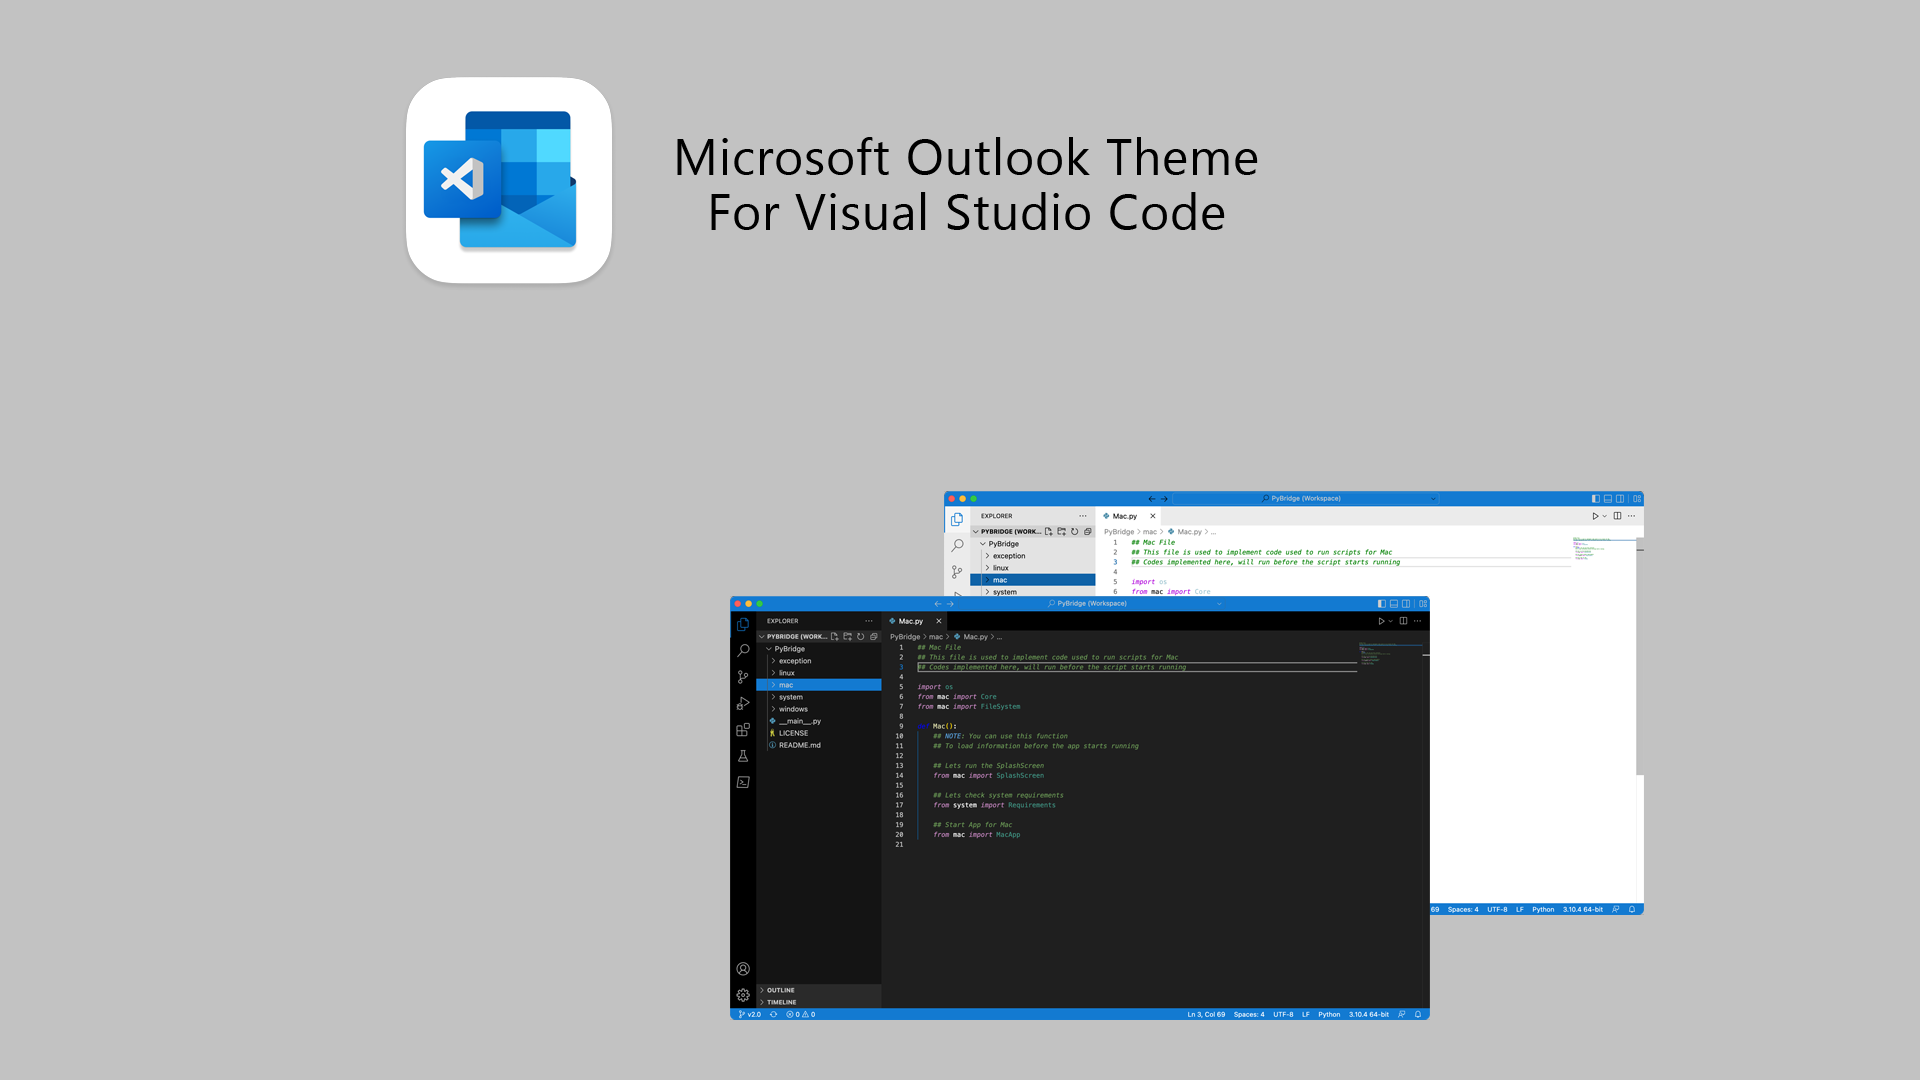 Outlook for Visual Studio Code